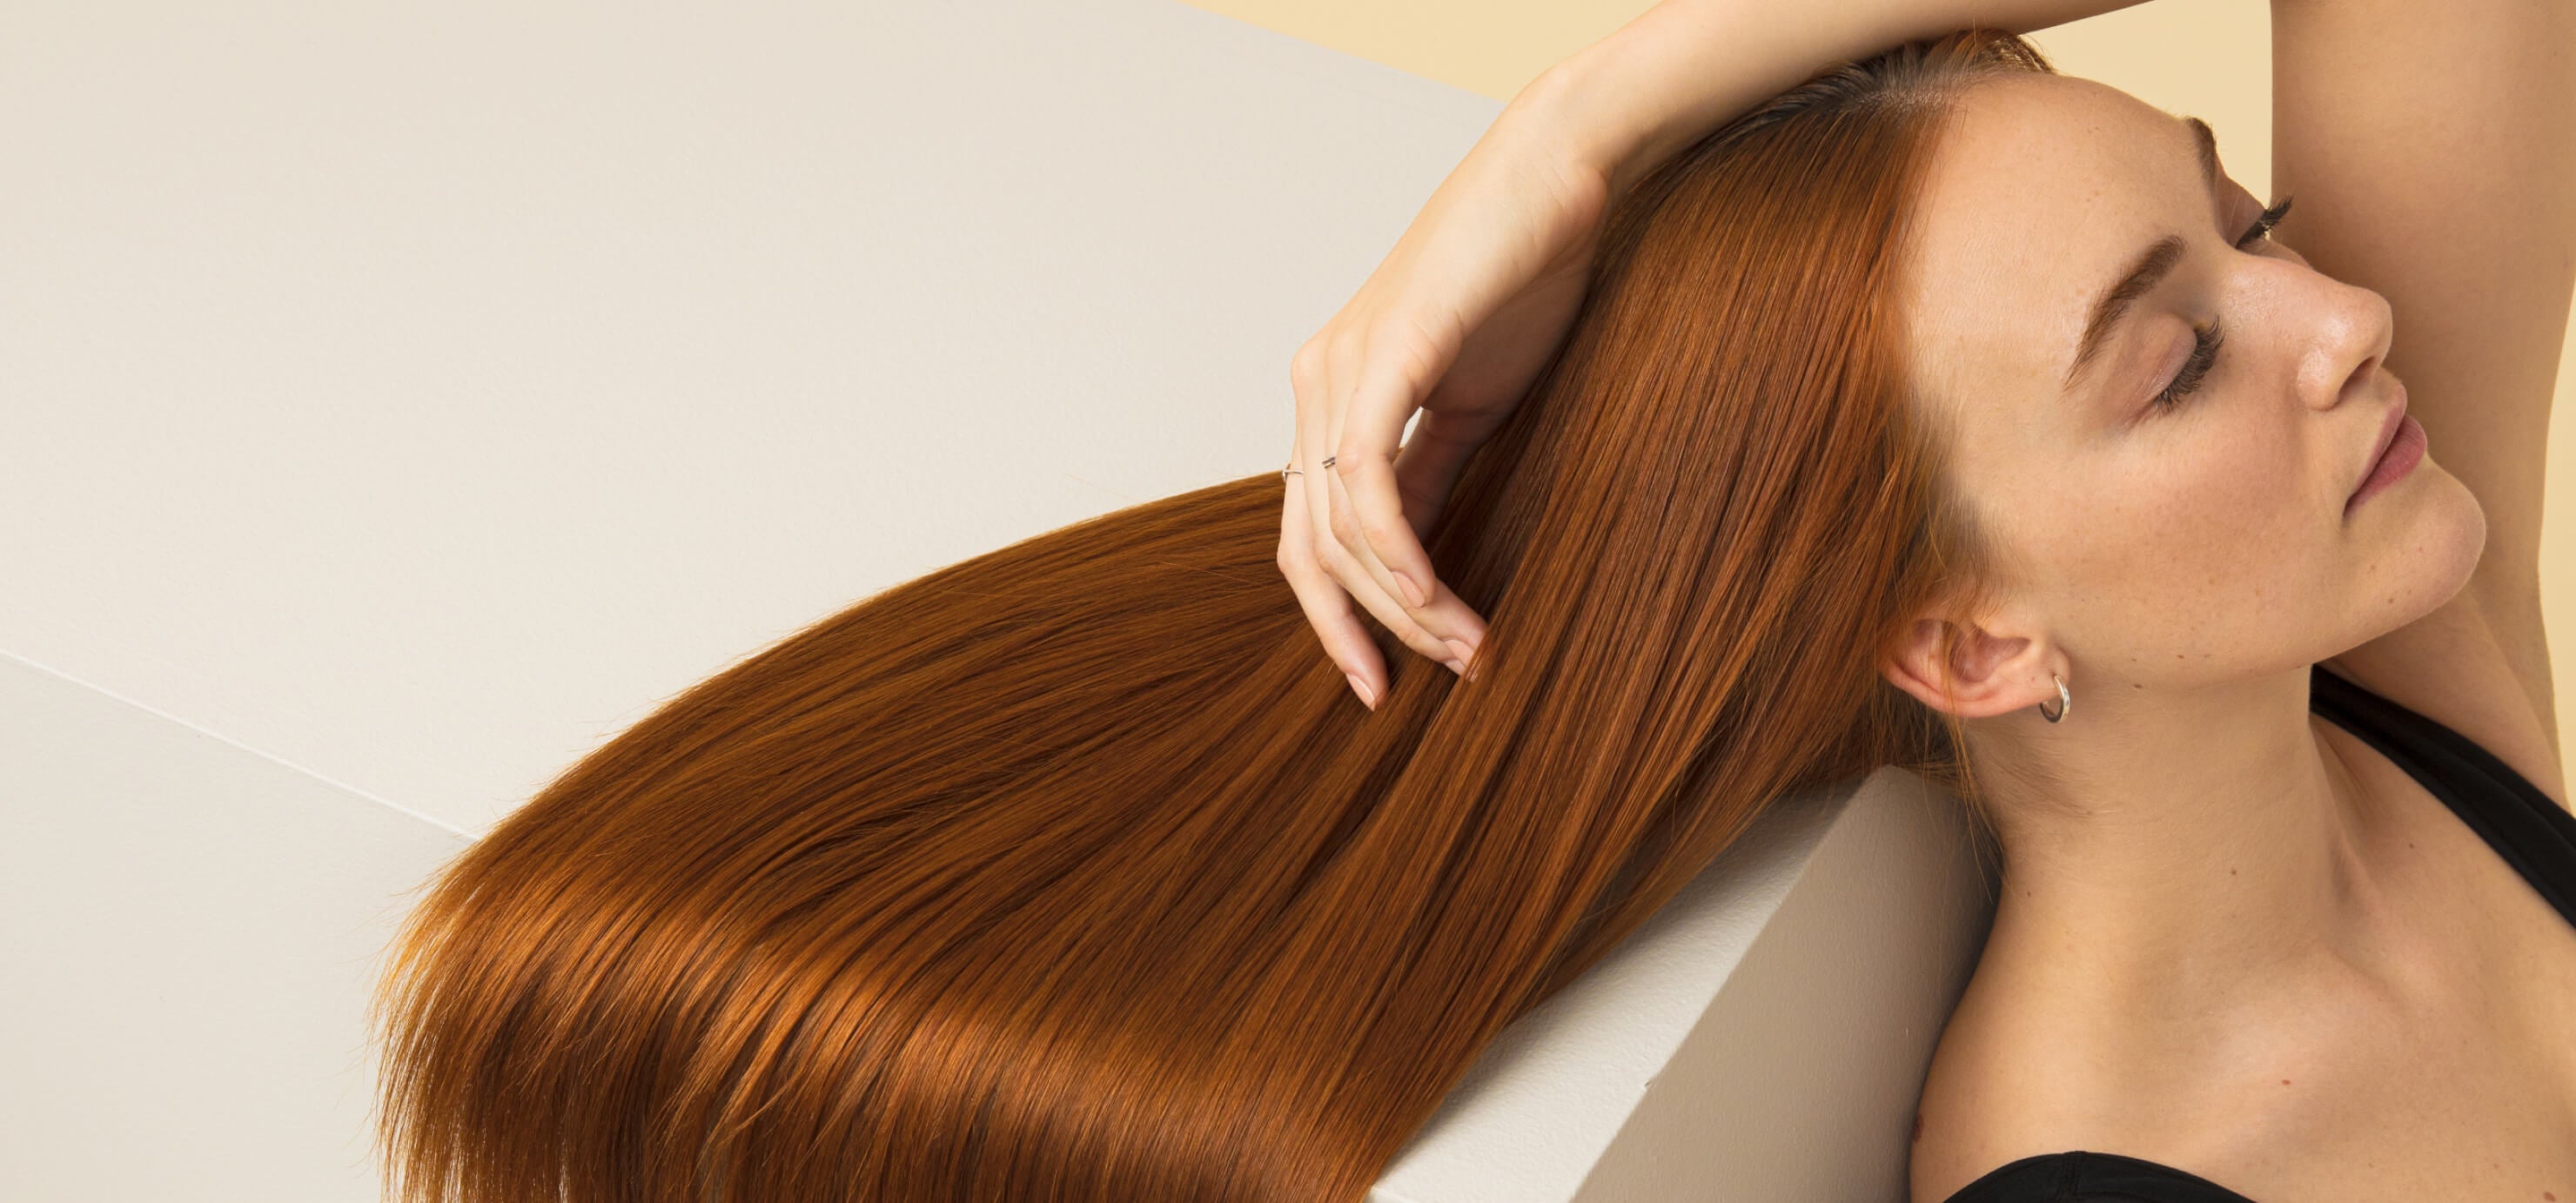 Biotin or Collagen? What is better for Thinning Hair? 